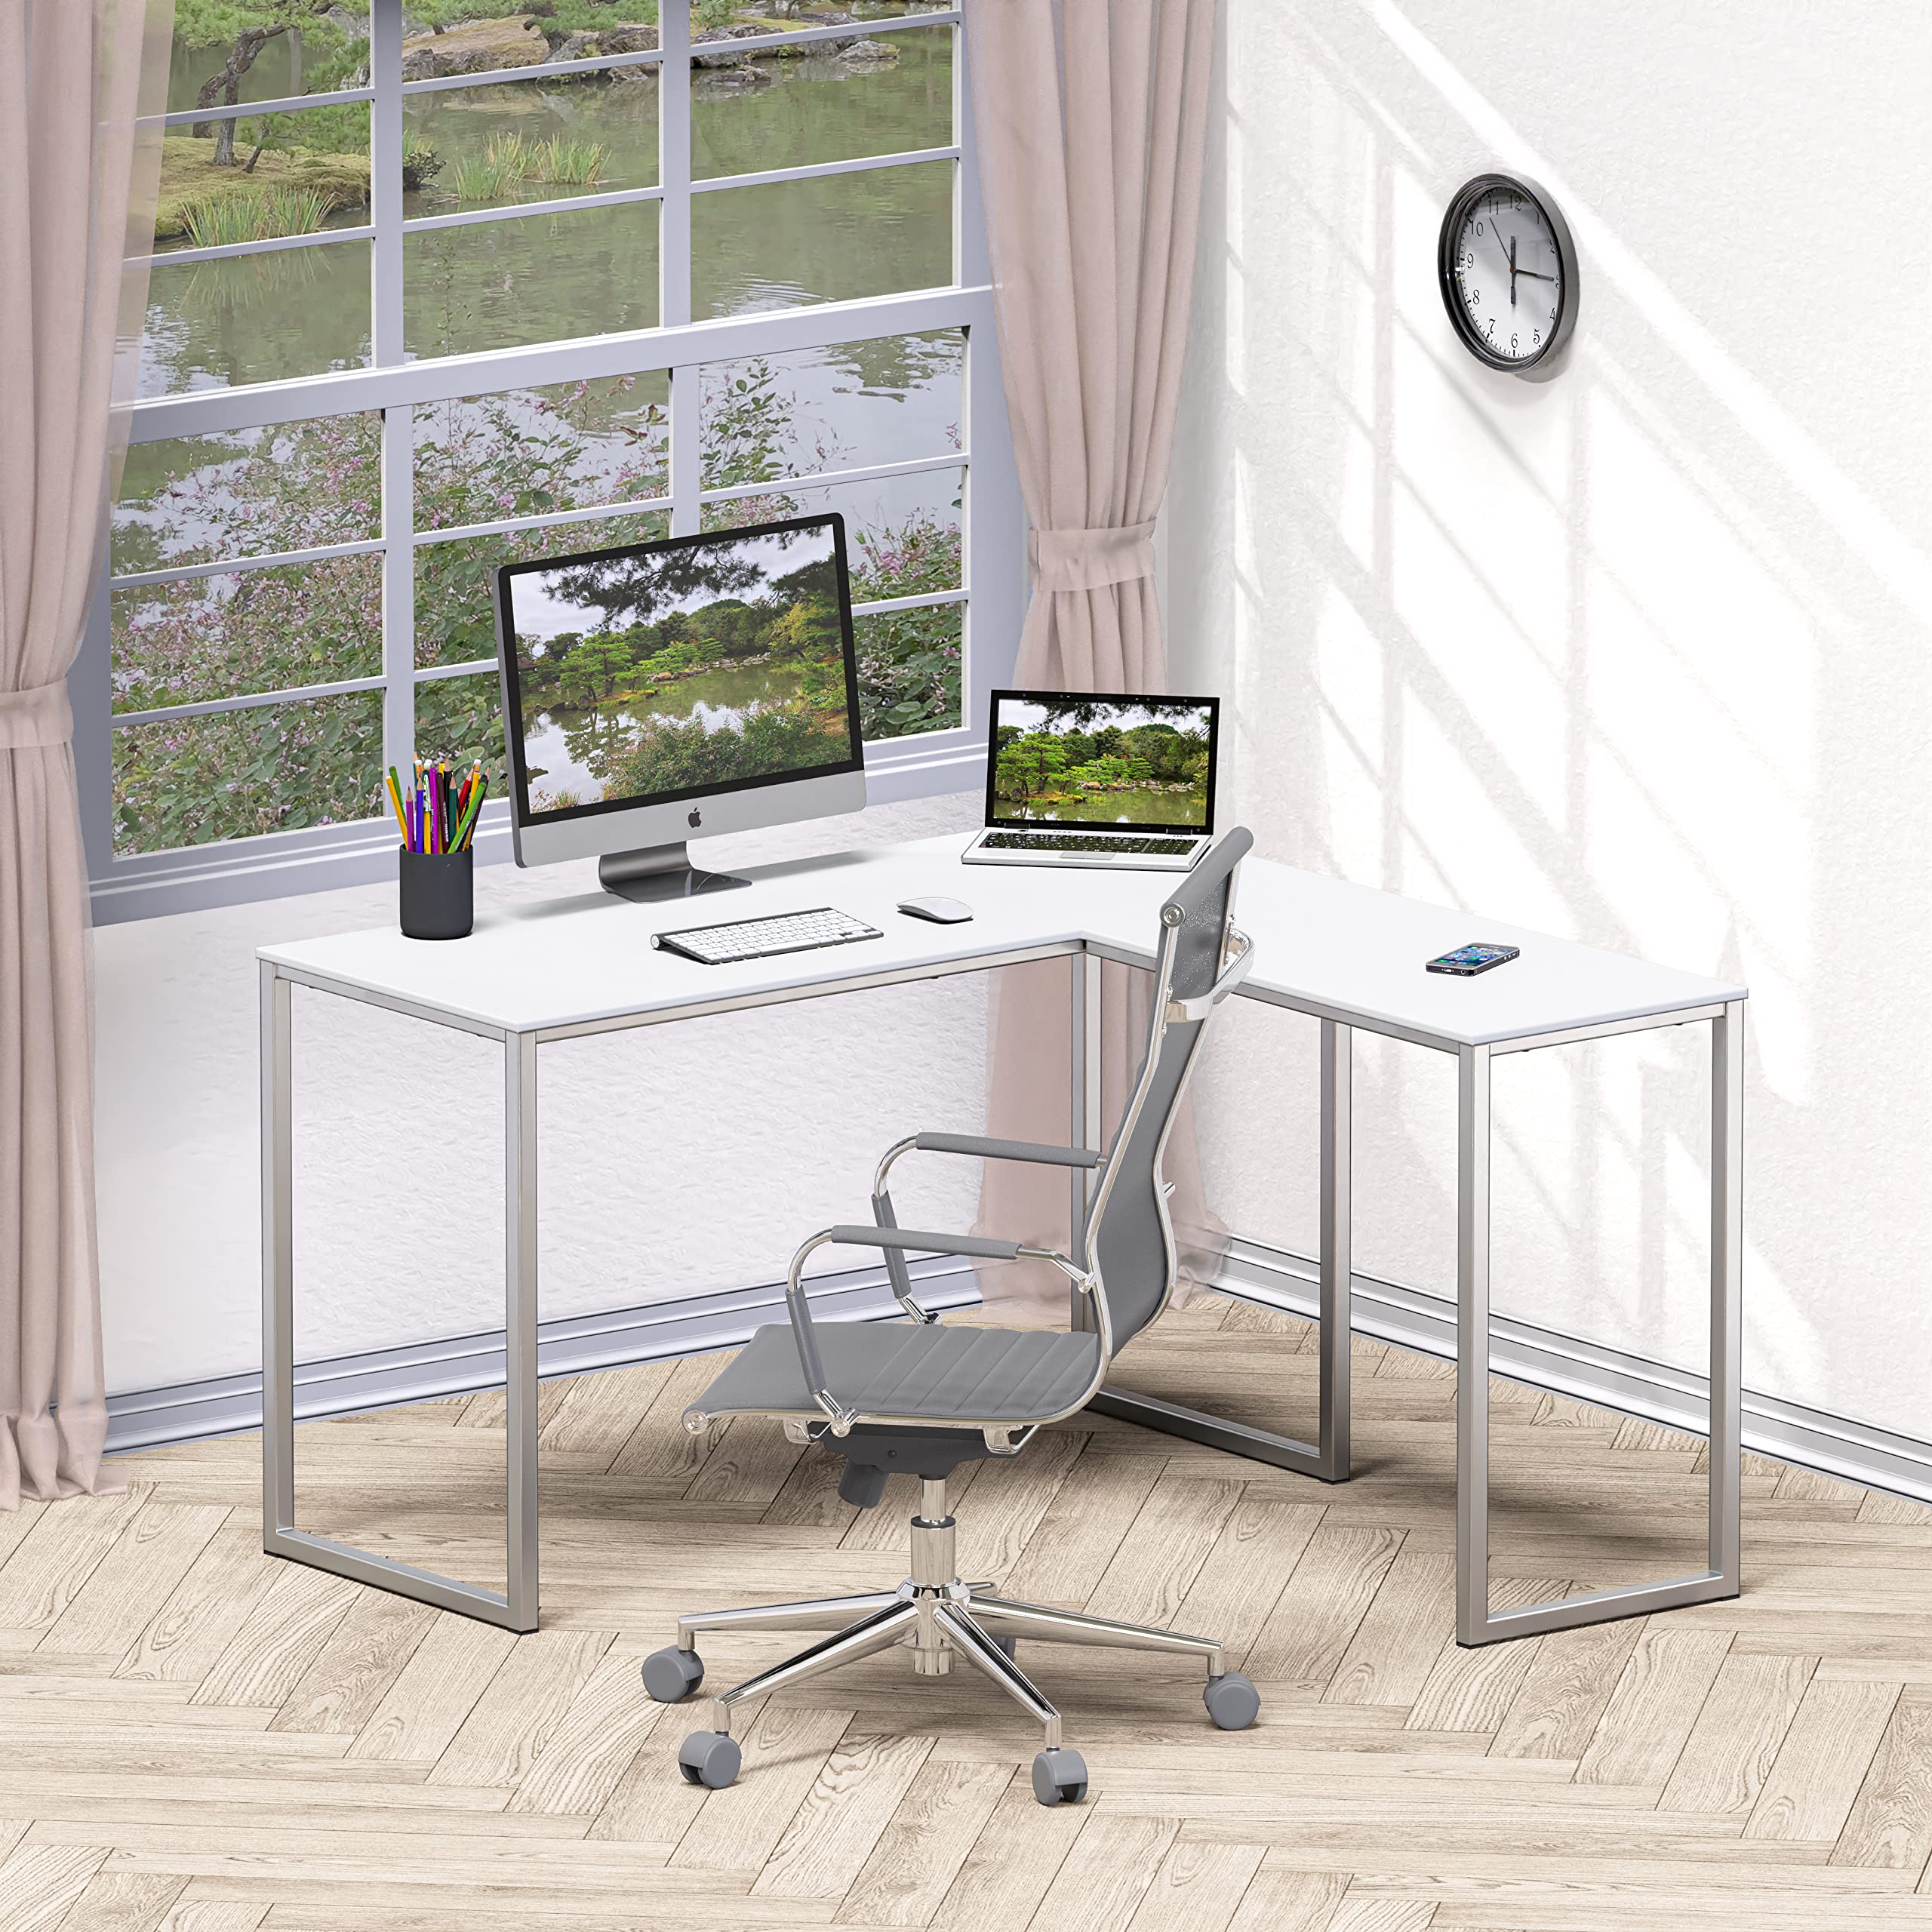 SHW 48-Inch Mission L-Shaped Home Computer desk, White - image 2 of 5